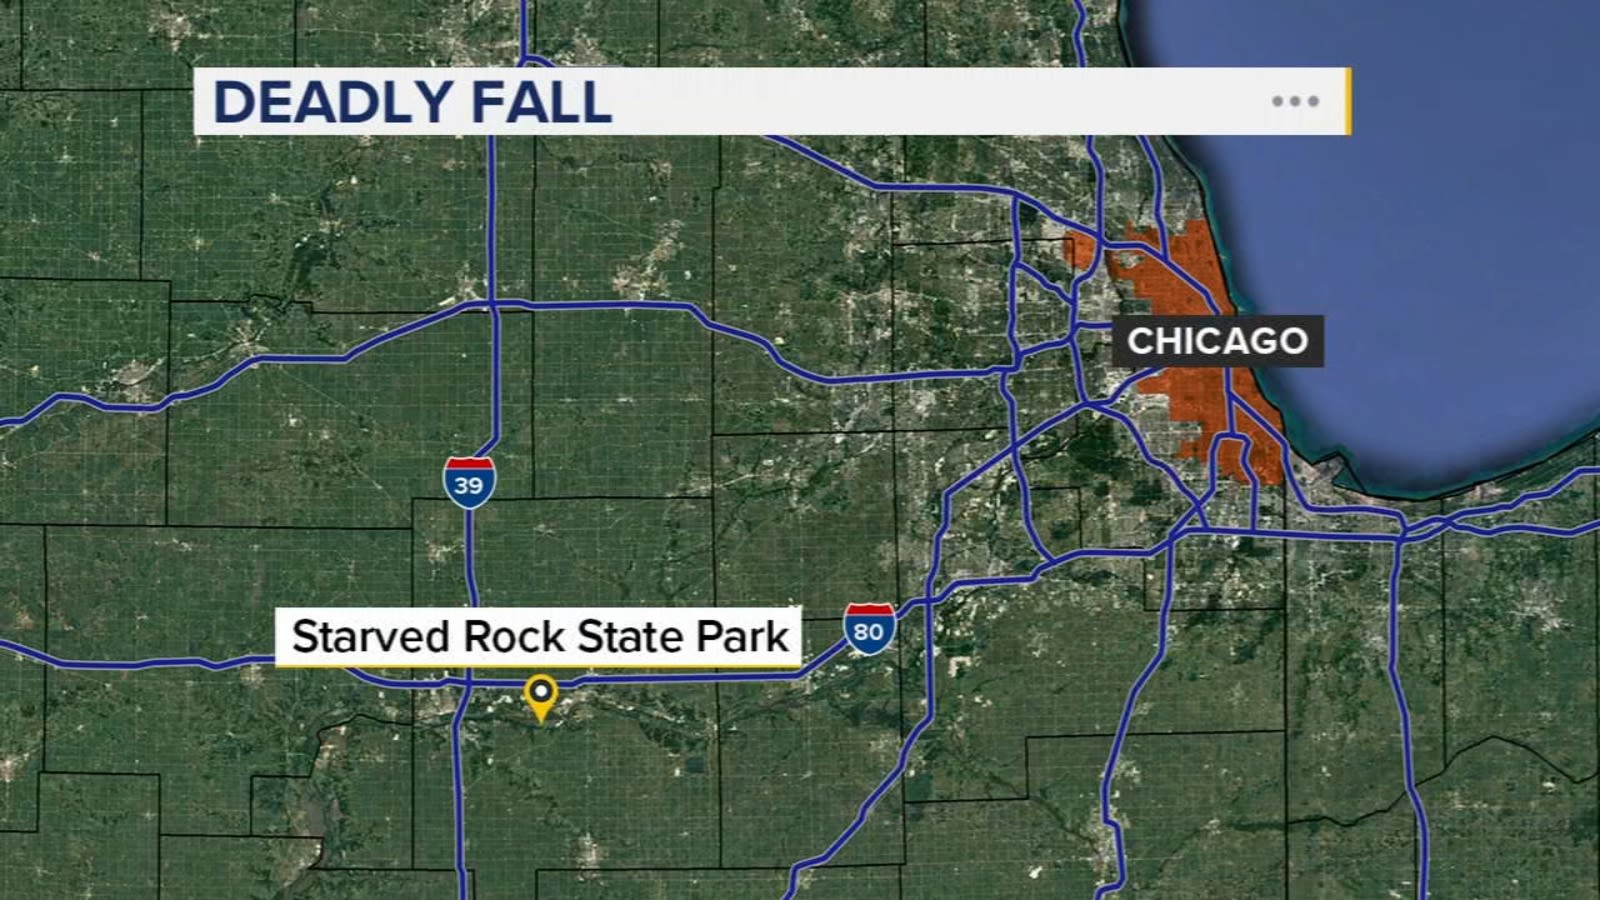 Oswego man identified in deadly fall at Starved Rock State Park, LaSalle County Coroner says